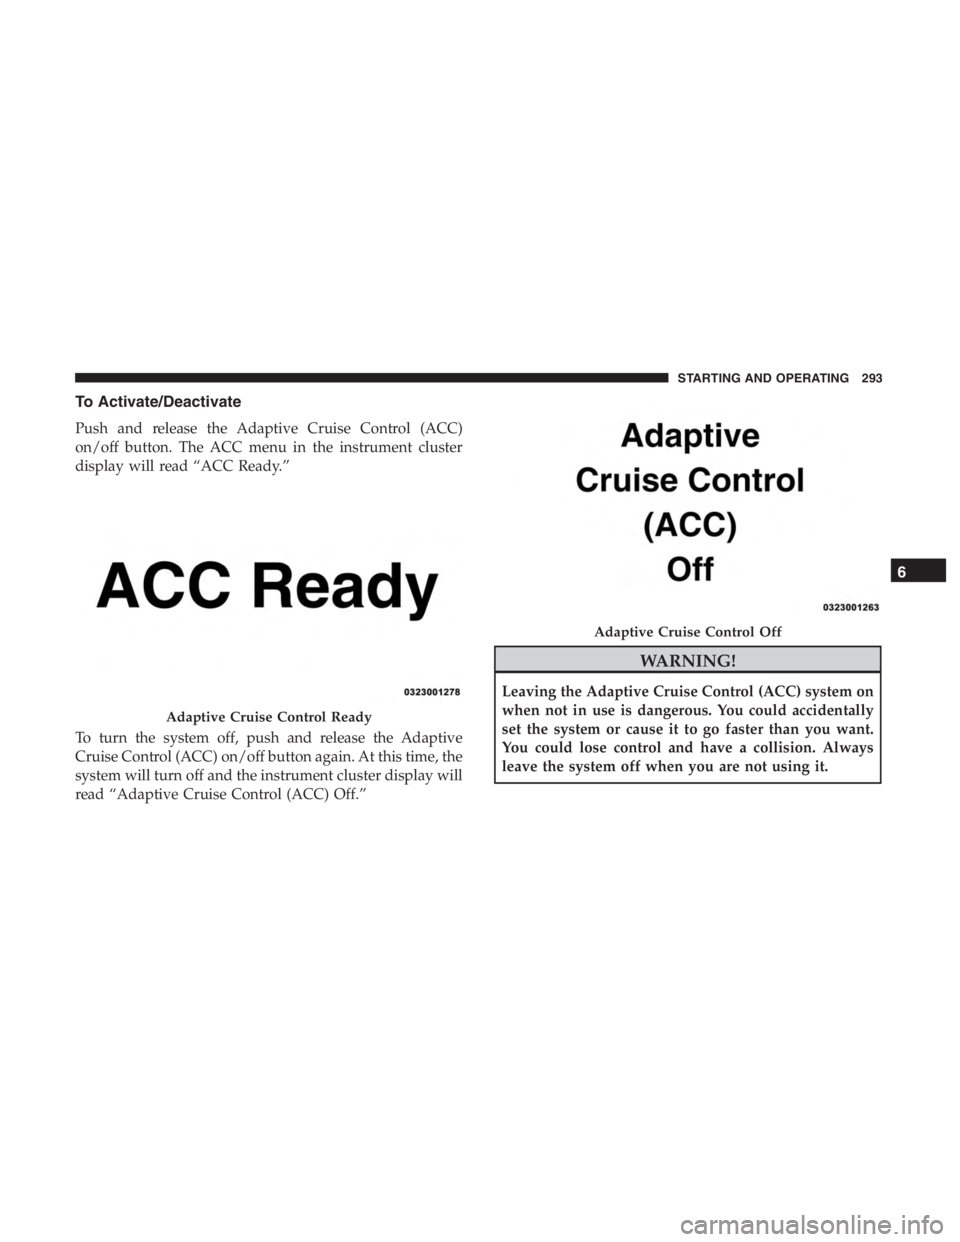 JEEP CHEROKEE LIMITED 2019  Owners Manual To Activate/Deactivate
Push and release the Adaptive Cruise Control (ACC)
on/off button. The ACC menu in the instrument cluster
display will read “ACC Ready.”
To turn the system off, push and rele